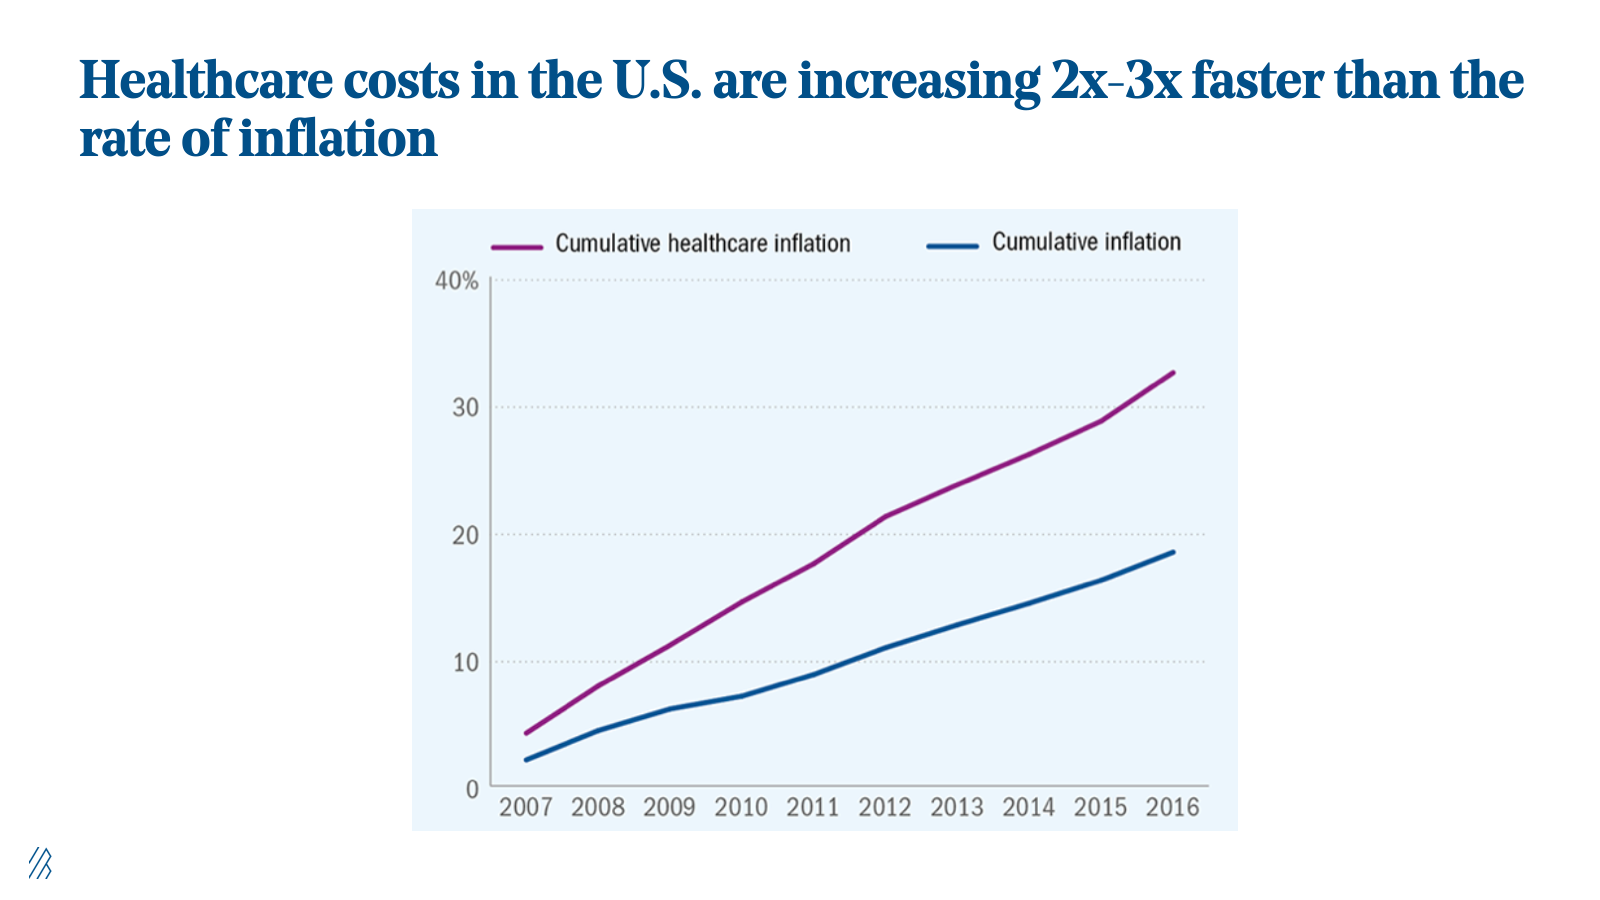 Healthcare costs in the U.S. are increasing 2x-3x faster than the rate of inflation. 